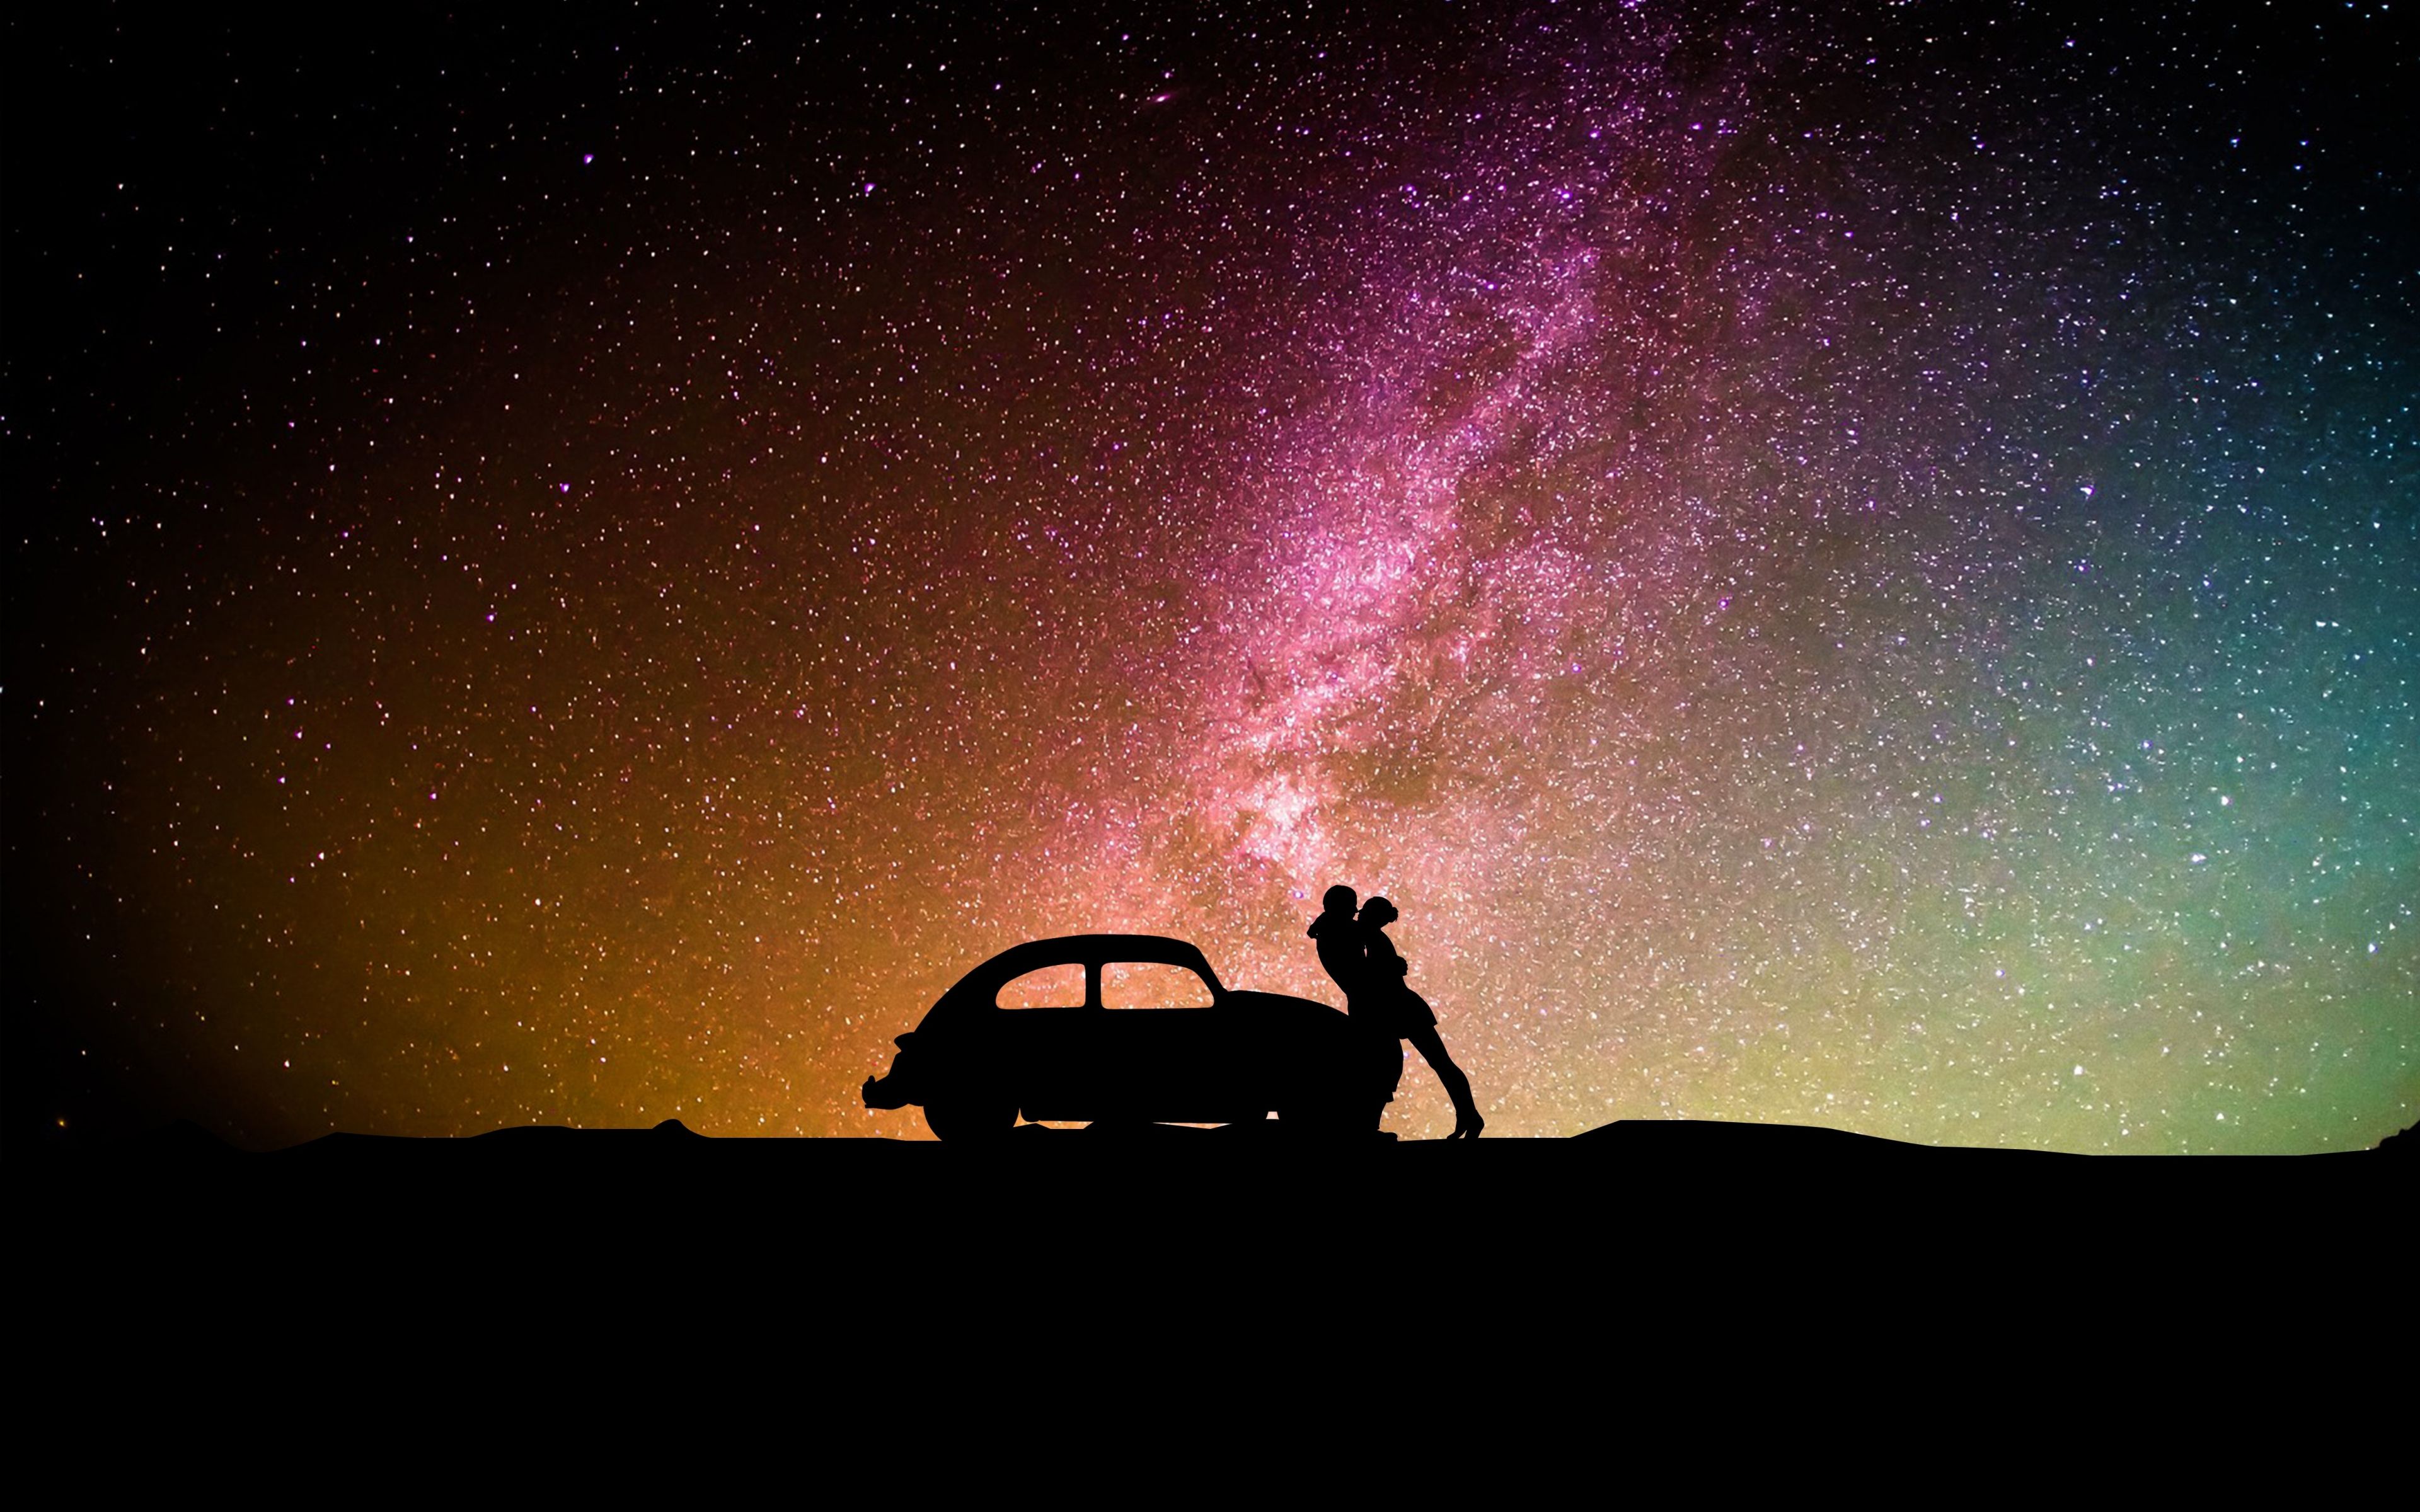 Download 3840x2400 wallpaper silhouettes, couple, car, milky way, hug, 4k, ultra HD 16: widescreen, 3840x2400 HD image, background, 8104